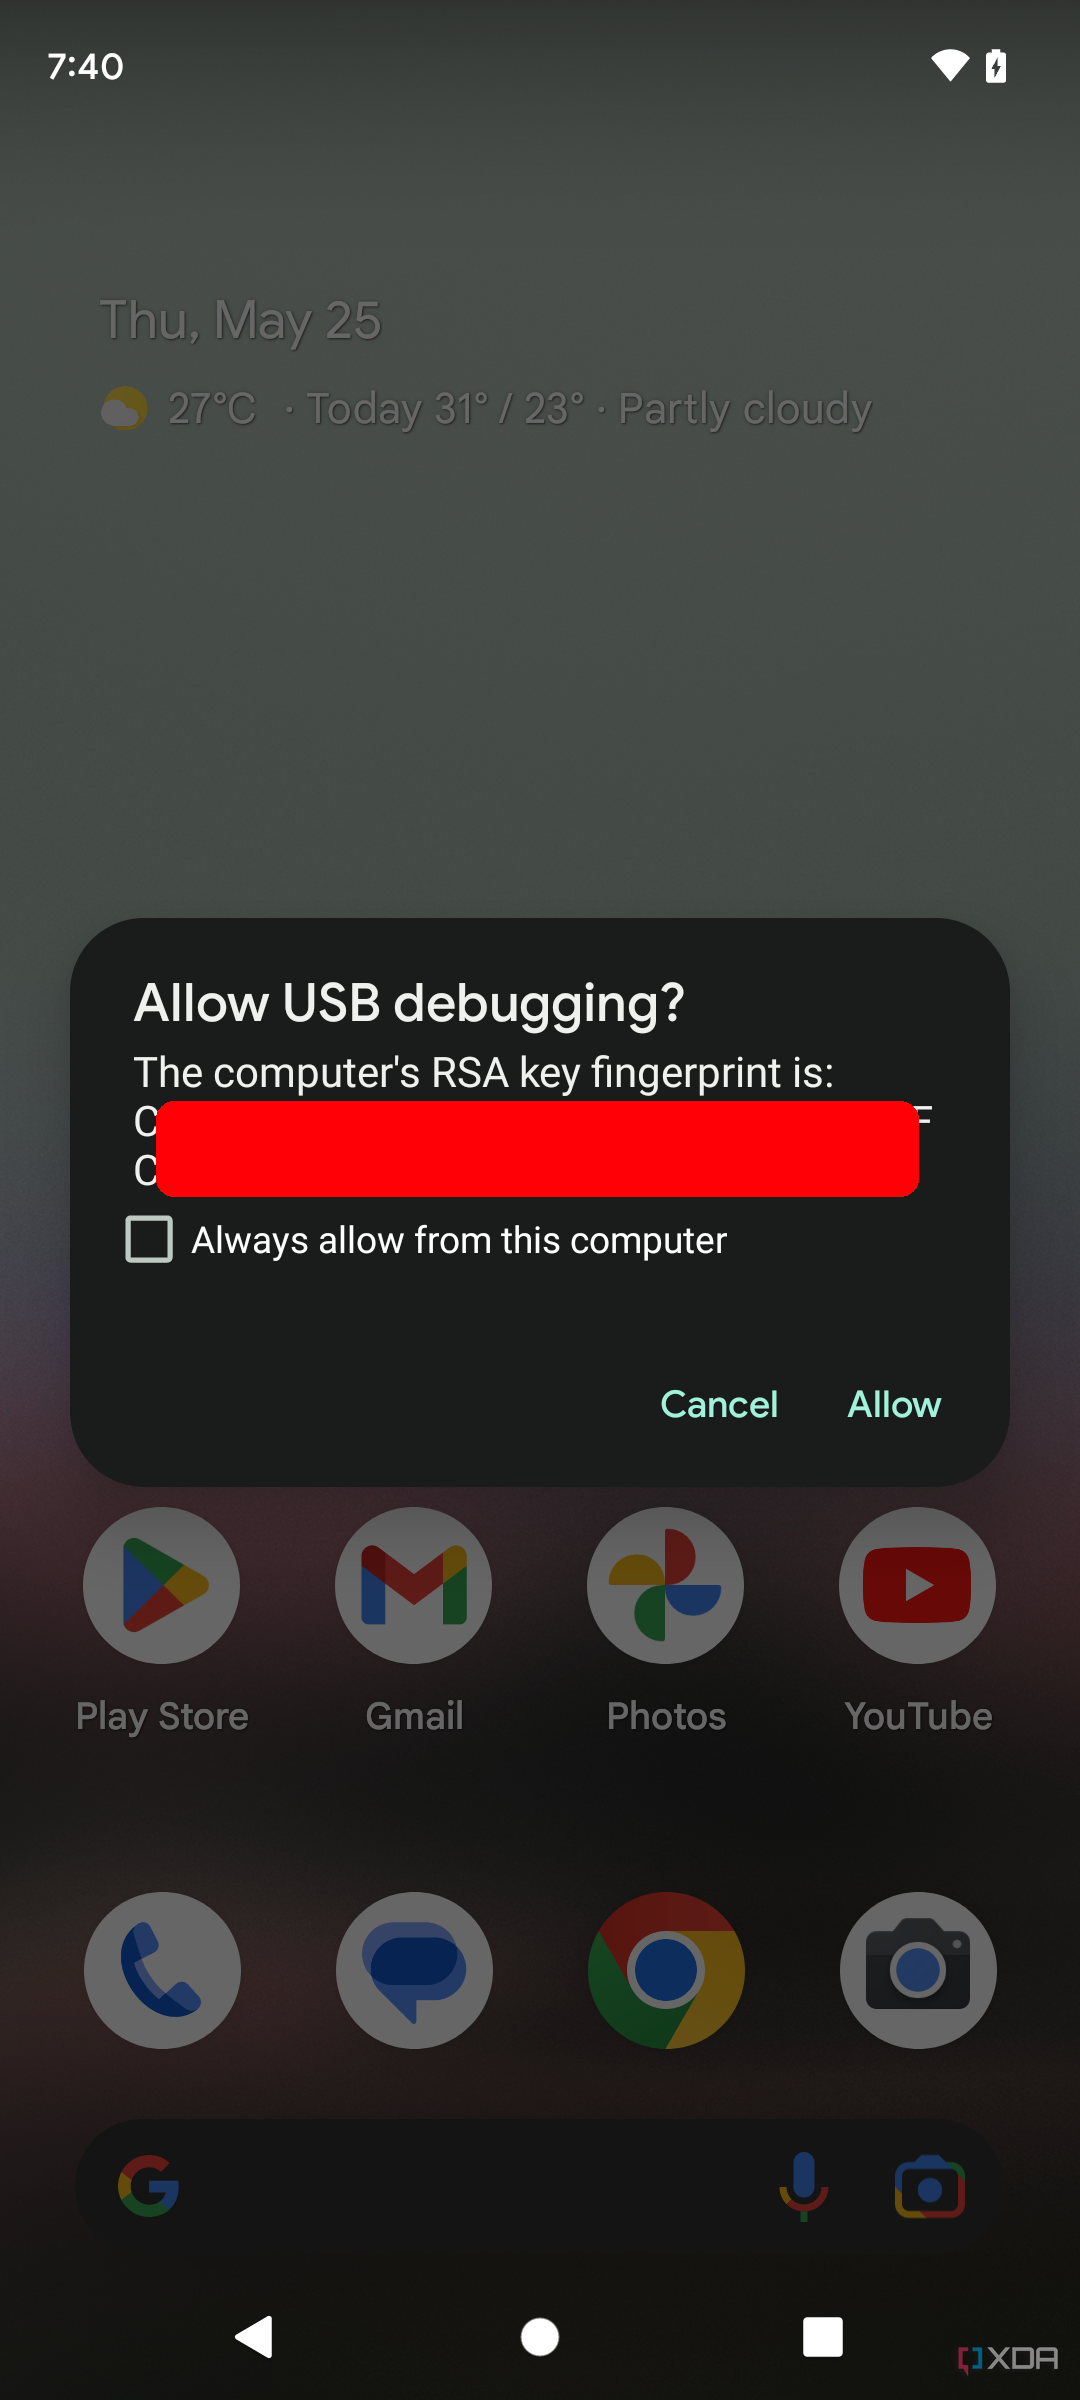 Allow USB debugging from a PC on a Google Pixel phone